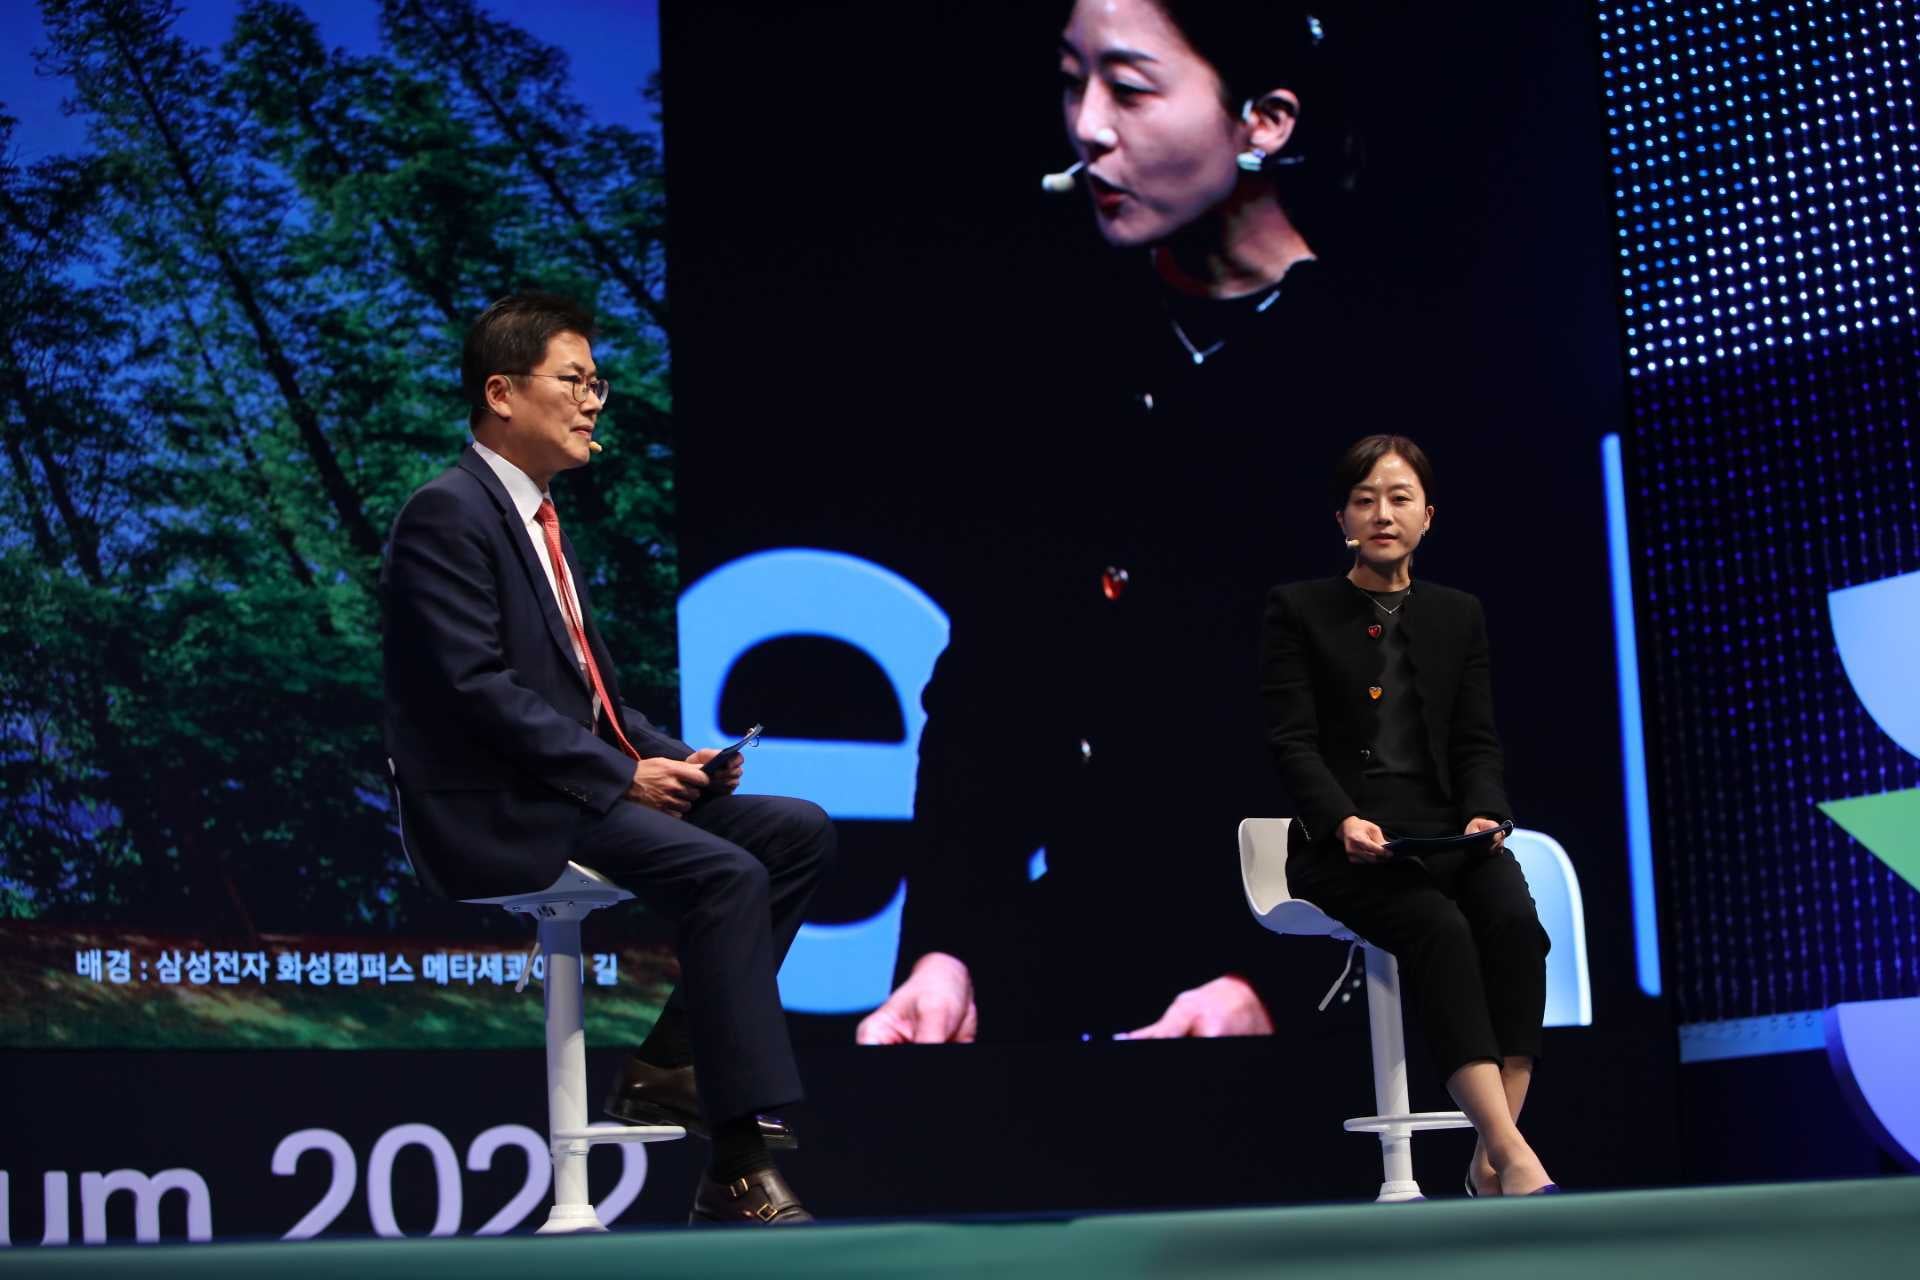 HyunJung Seo, Vice President of DS Corporate Sustainability Management at Samsung Electronics (Seo, giving her keynote speech.)